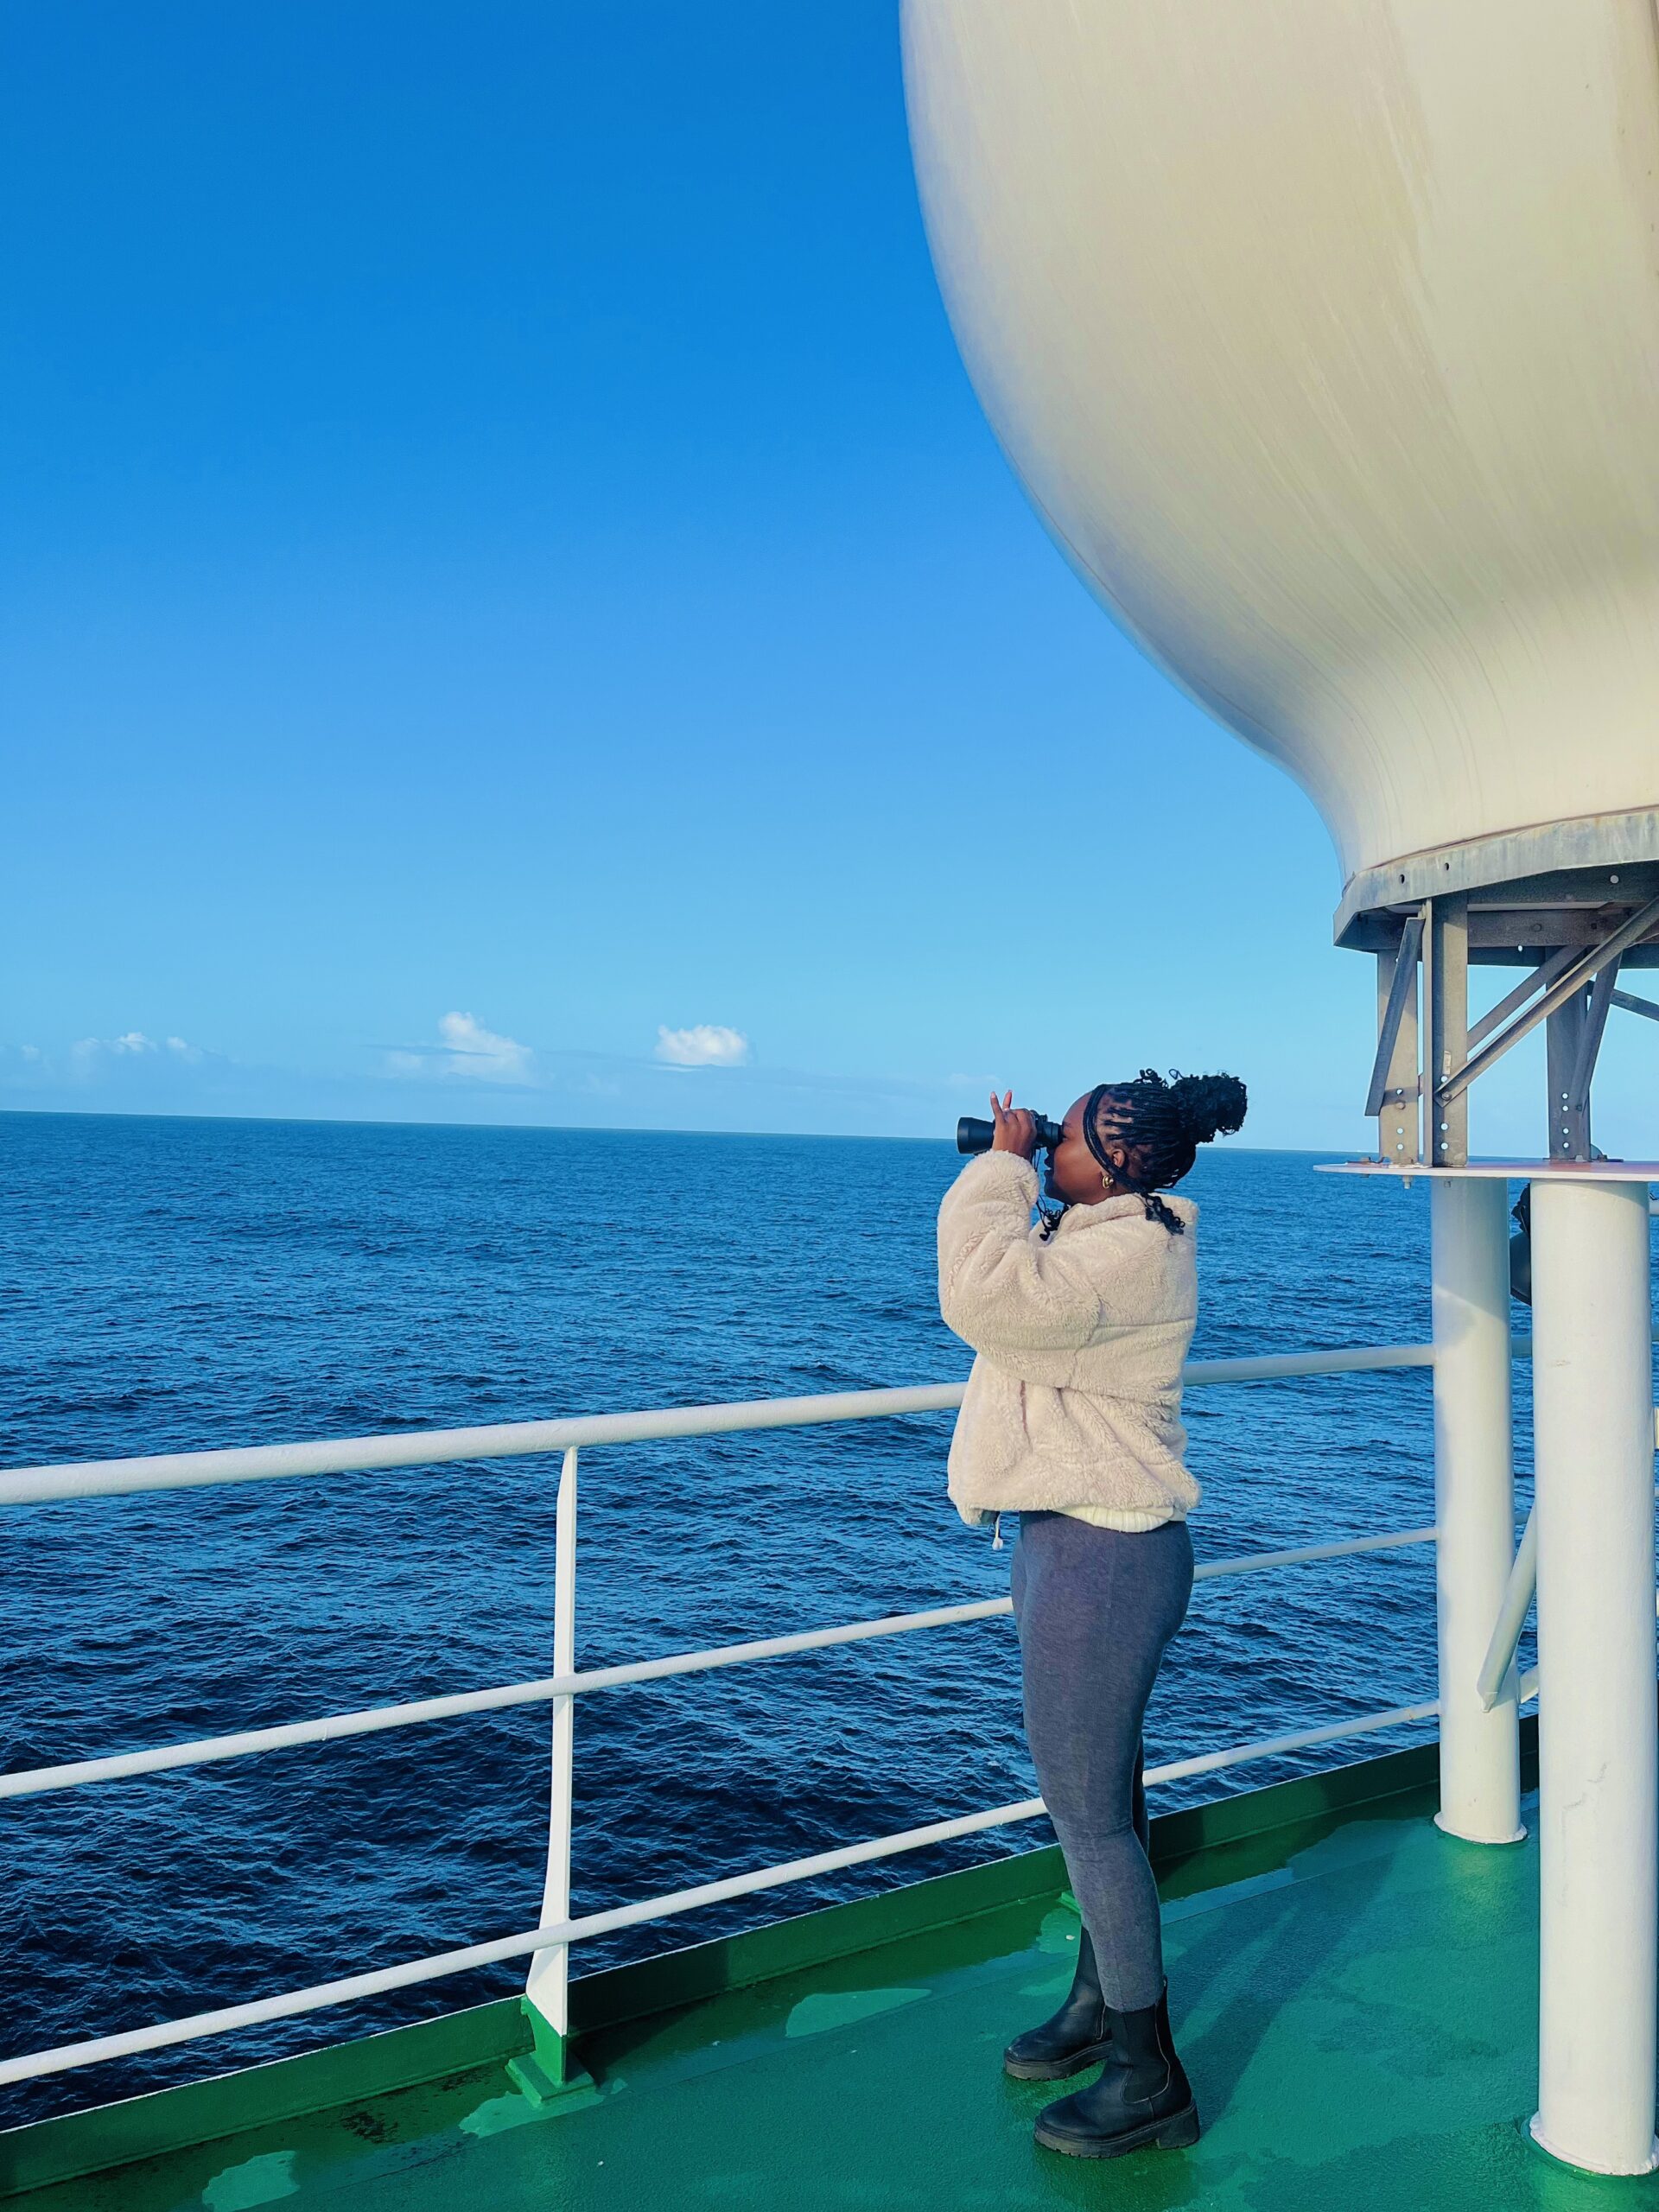 A Journey Beyond the Horizon: Olly’s Life-Changing Voyage experience on SA Agulhas II